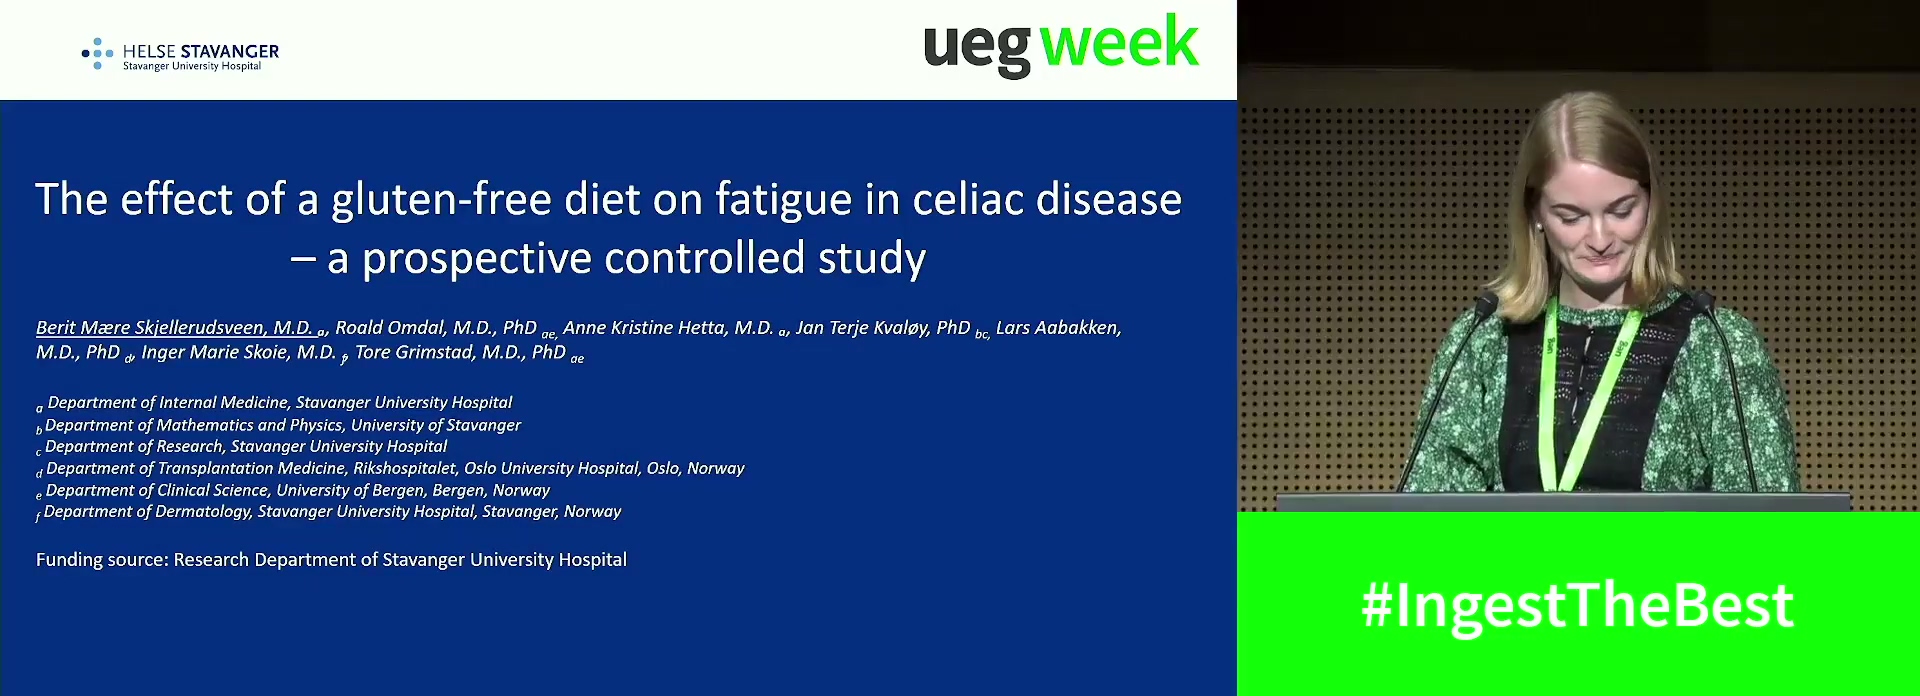 THE EFFECT OF A GLUTEN FREE DIET ON FATIGUE IN CELIAC DISEASE – A PROSPECTIVE CONTROLLED STUDY